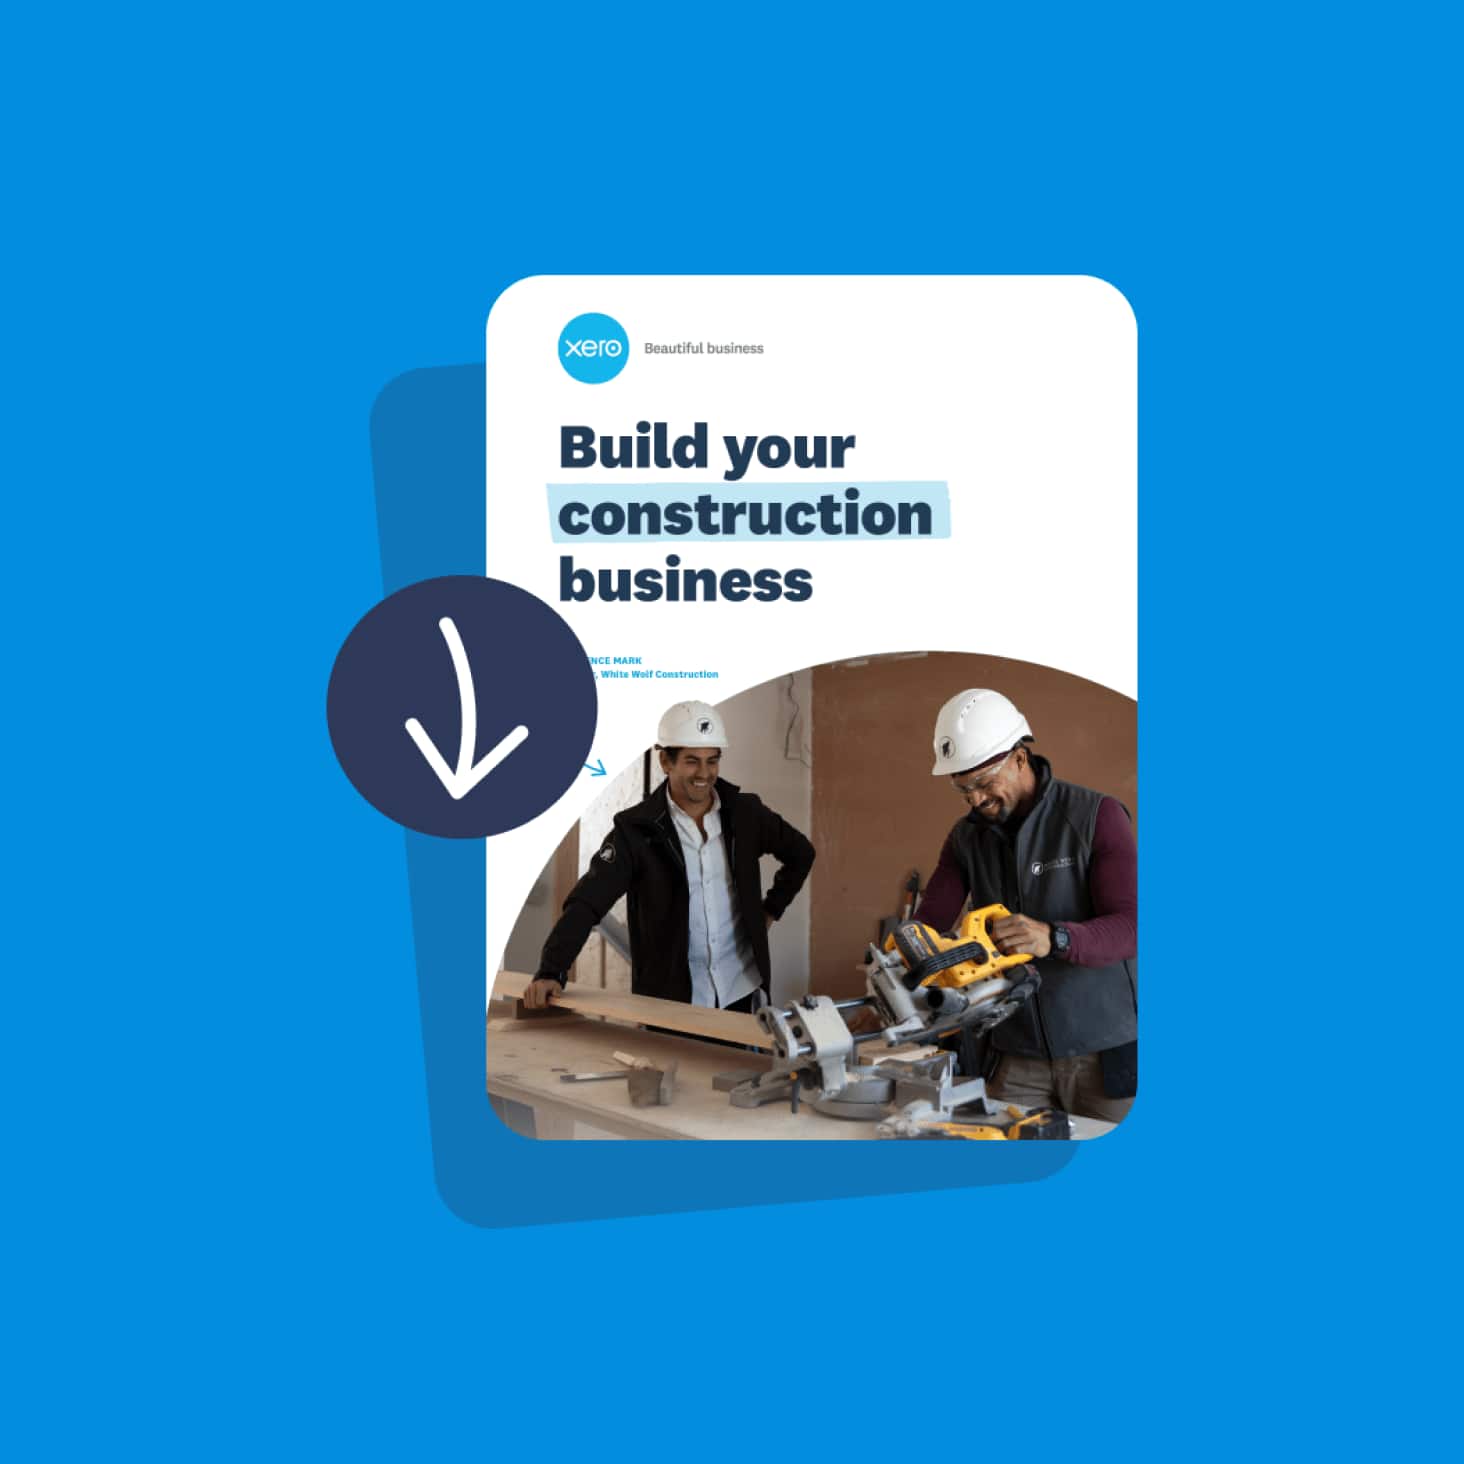 The cover of the ‘Build your construction business’ playbook showing two carpenters in hard hats at a workbench.